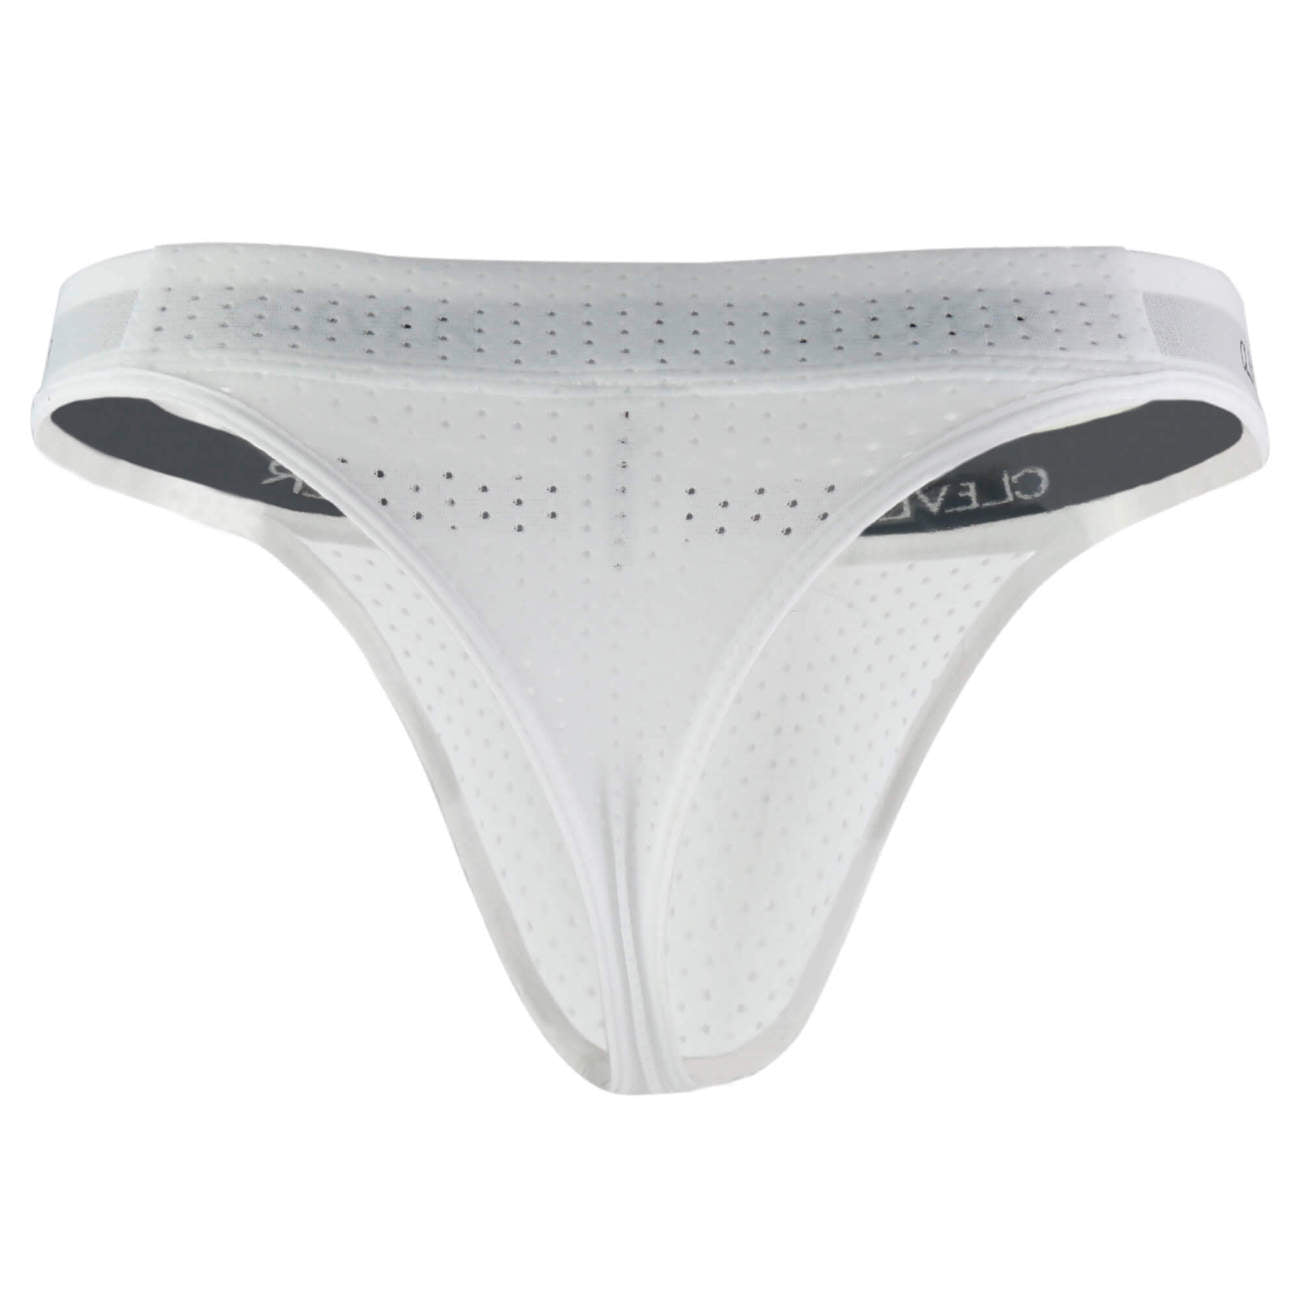 Clever 0001 Mesh Thong White